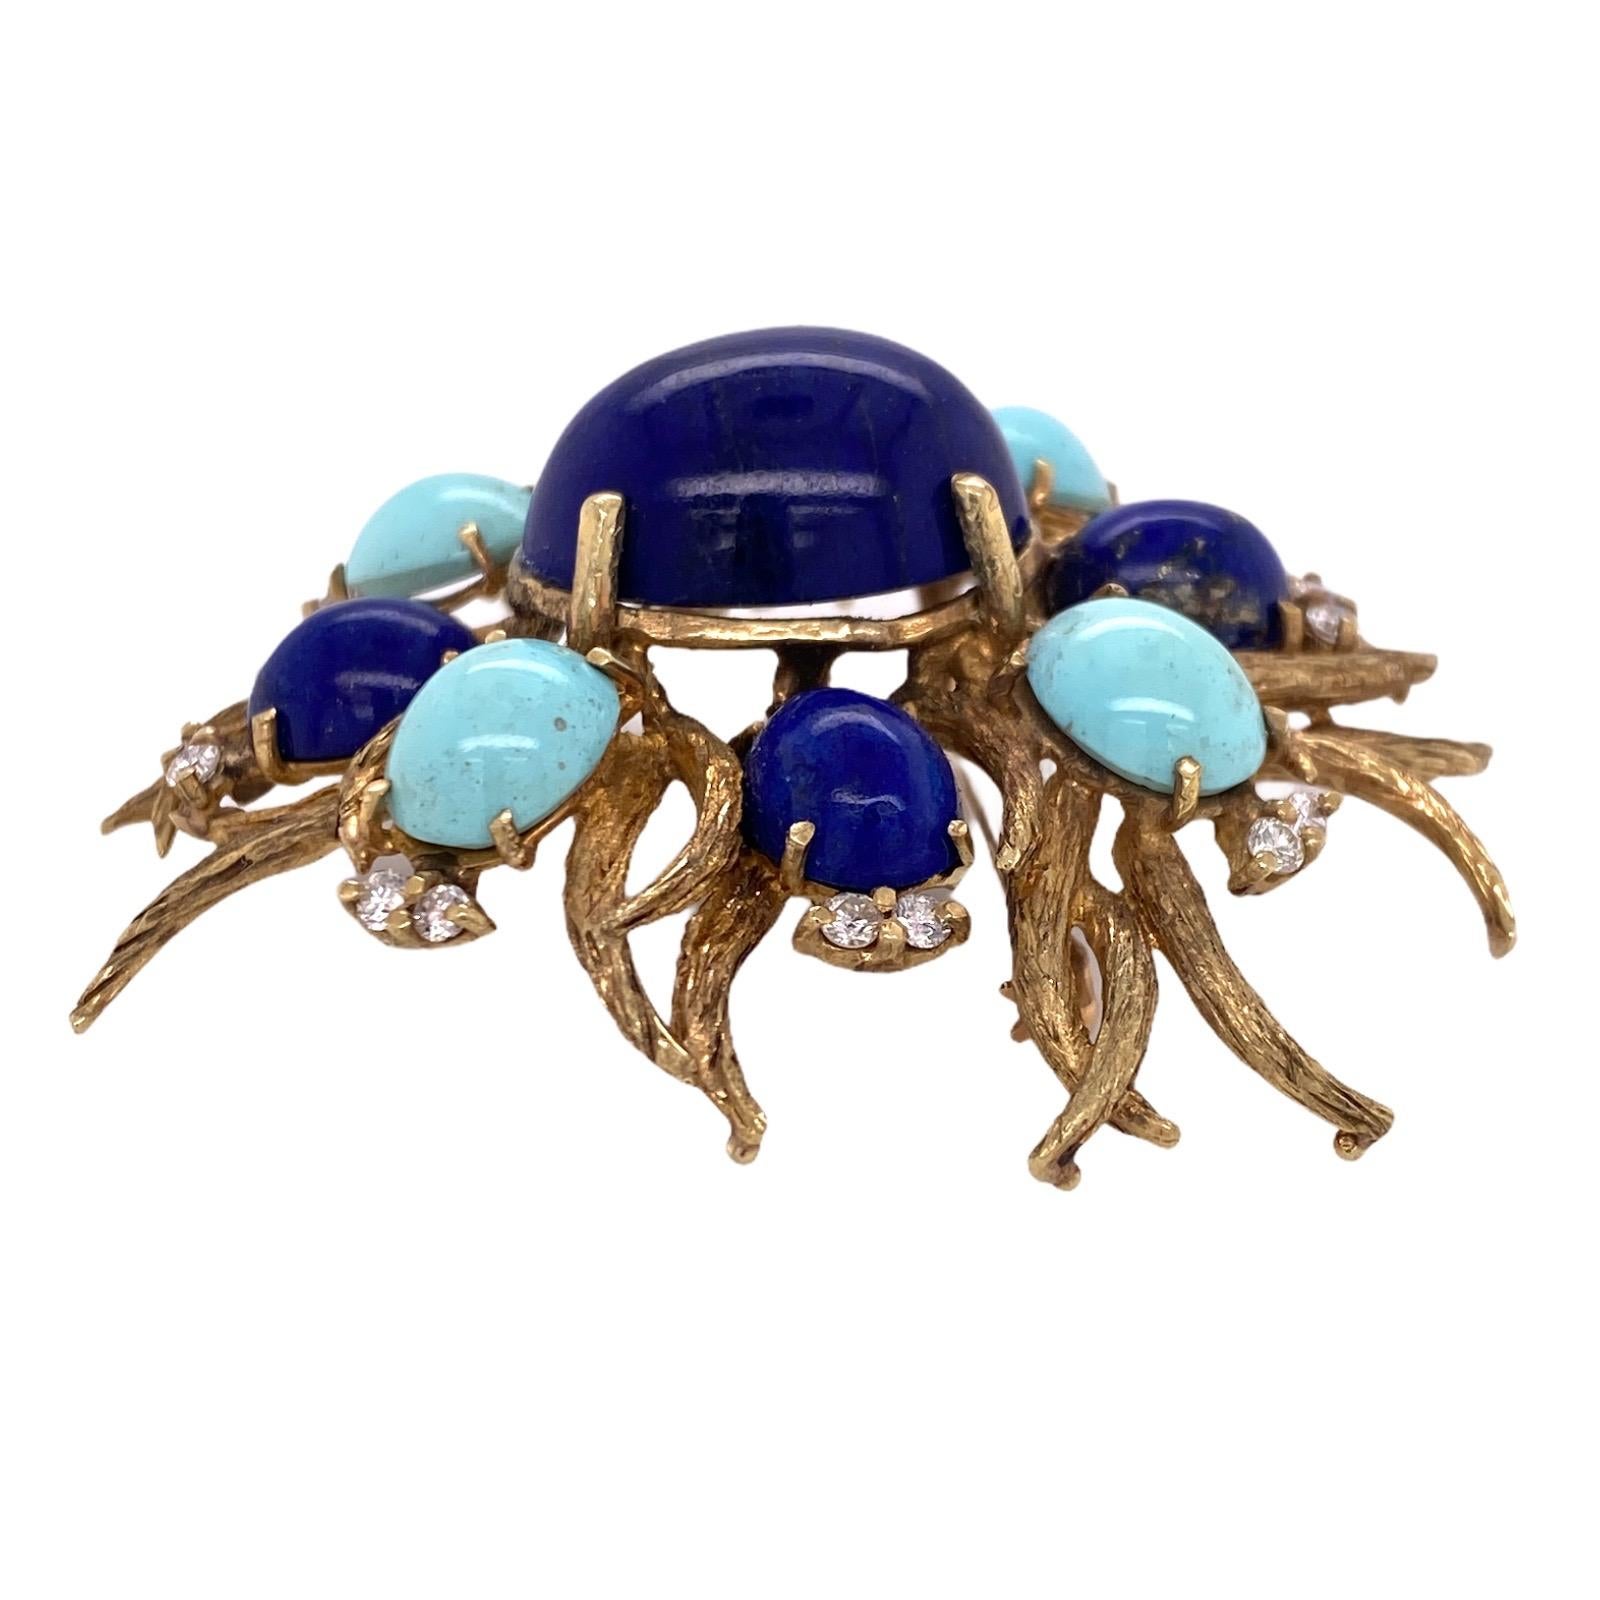 Diamond, turquoise, and lapis lazuli vintage brooch fashioned in 14 karat yellow gold. The colorful brooch features a center approximately 19 carat lapis lazuli gemstone with surrounding turquoise, lapis, and diamonds. The 16 round brilliant cut